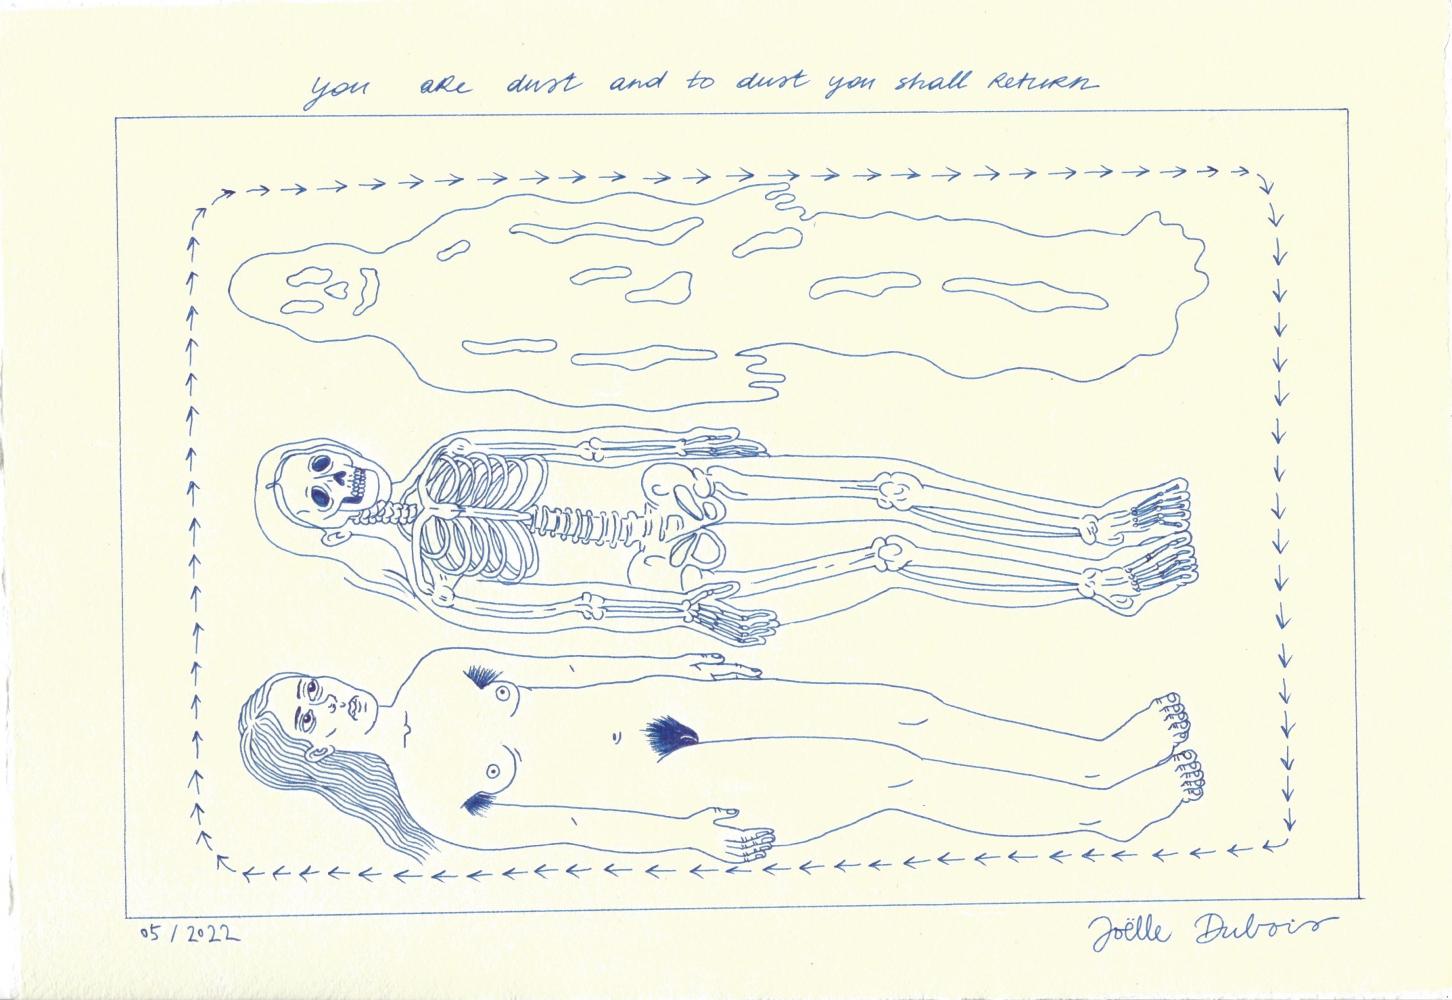 Joëlle Dubois "You are Dust and to Dust you shall return"